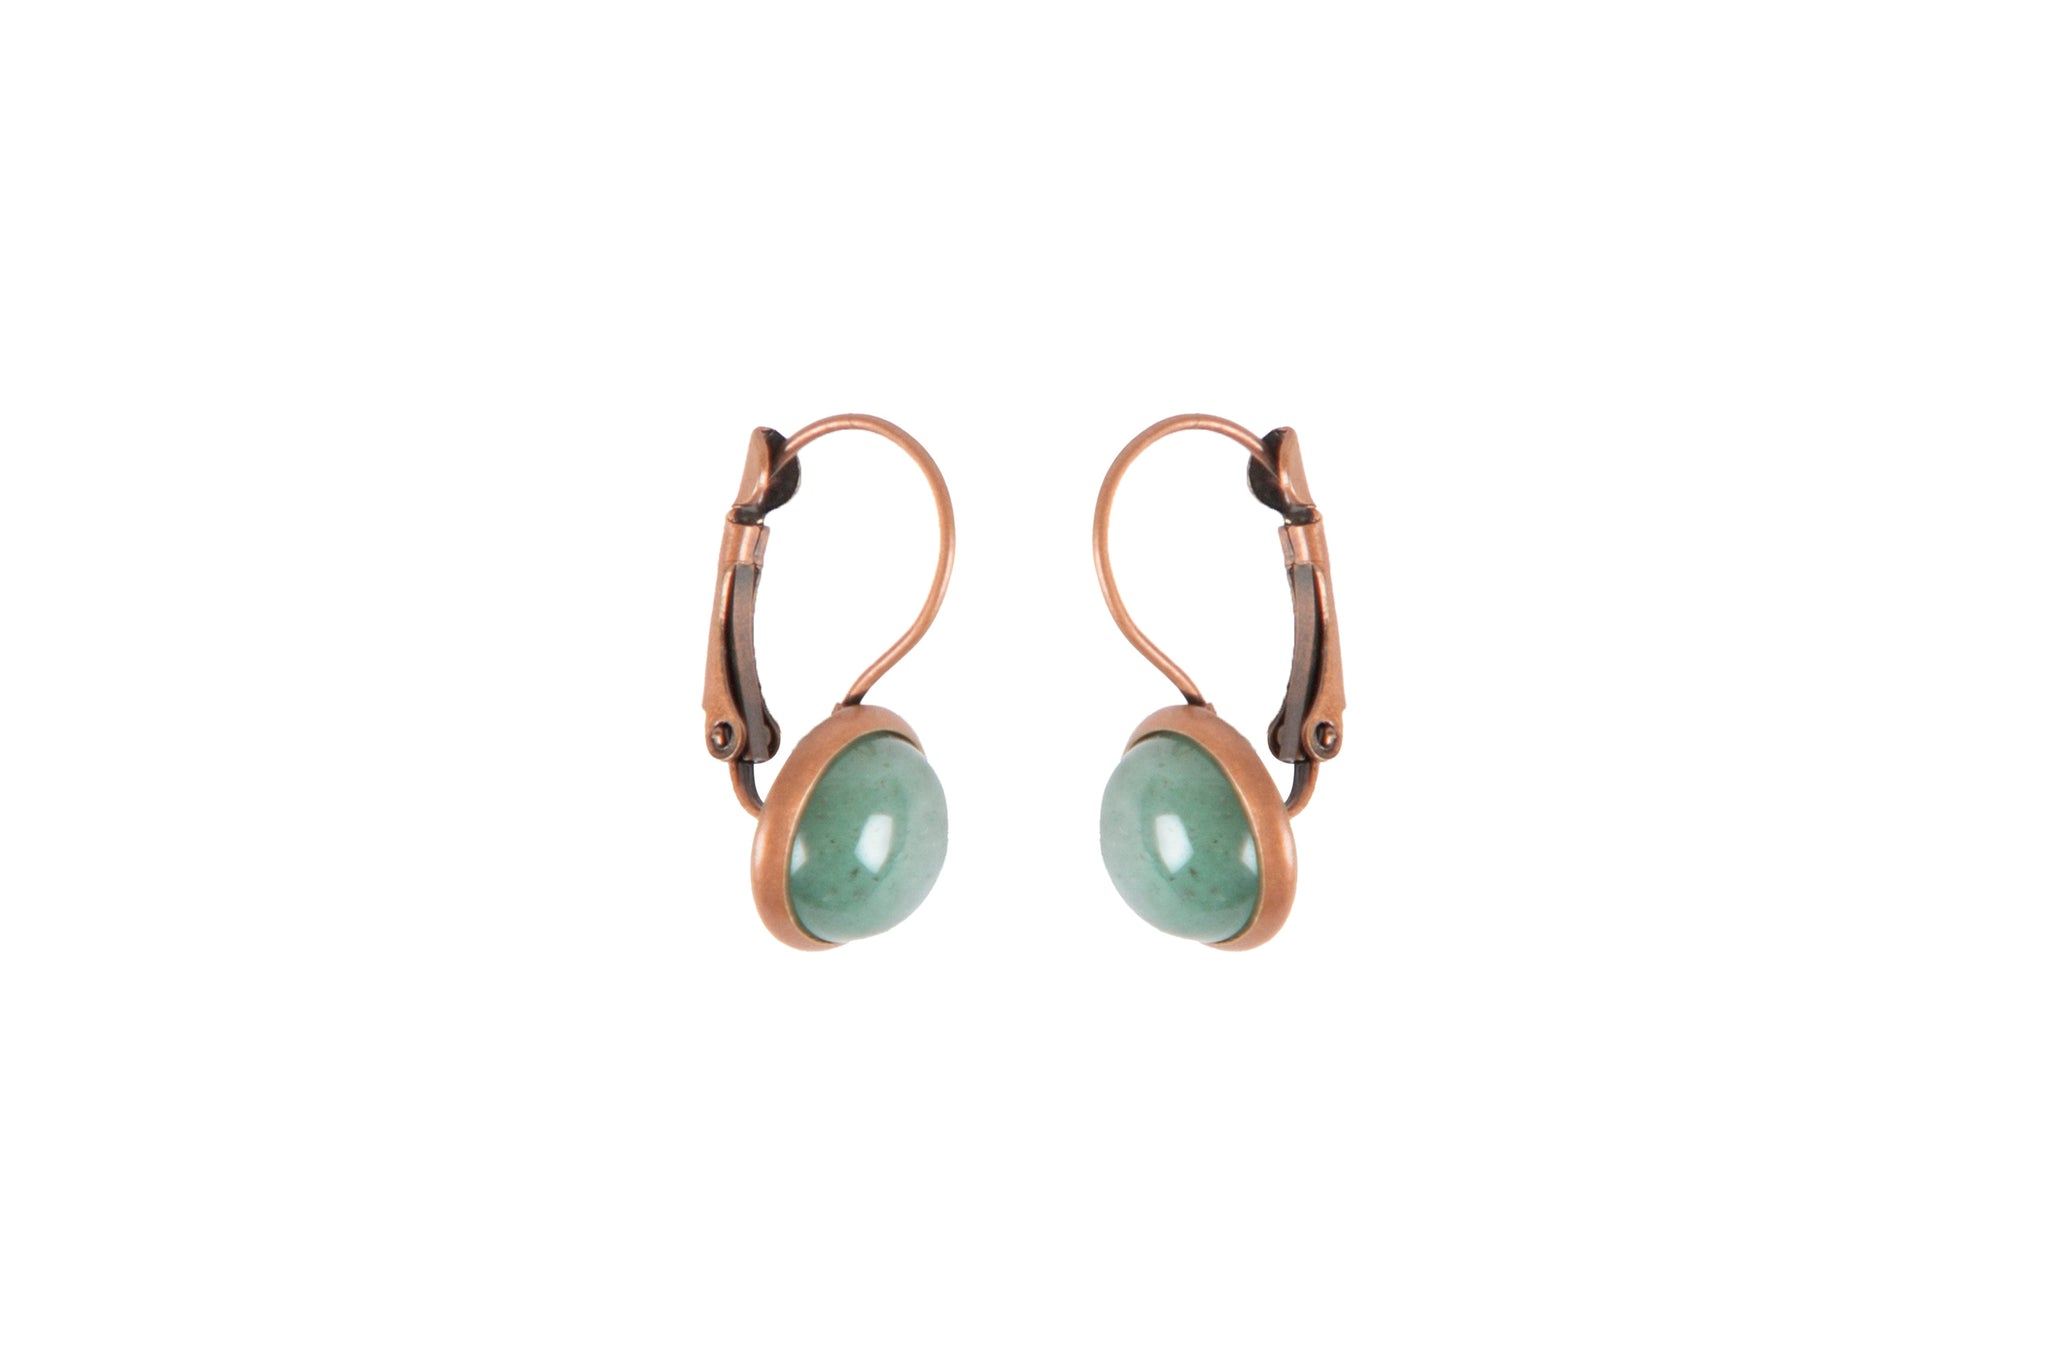 French Lever back earrings with Green Aventurine gemstone. Red Copper tone.